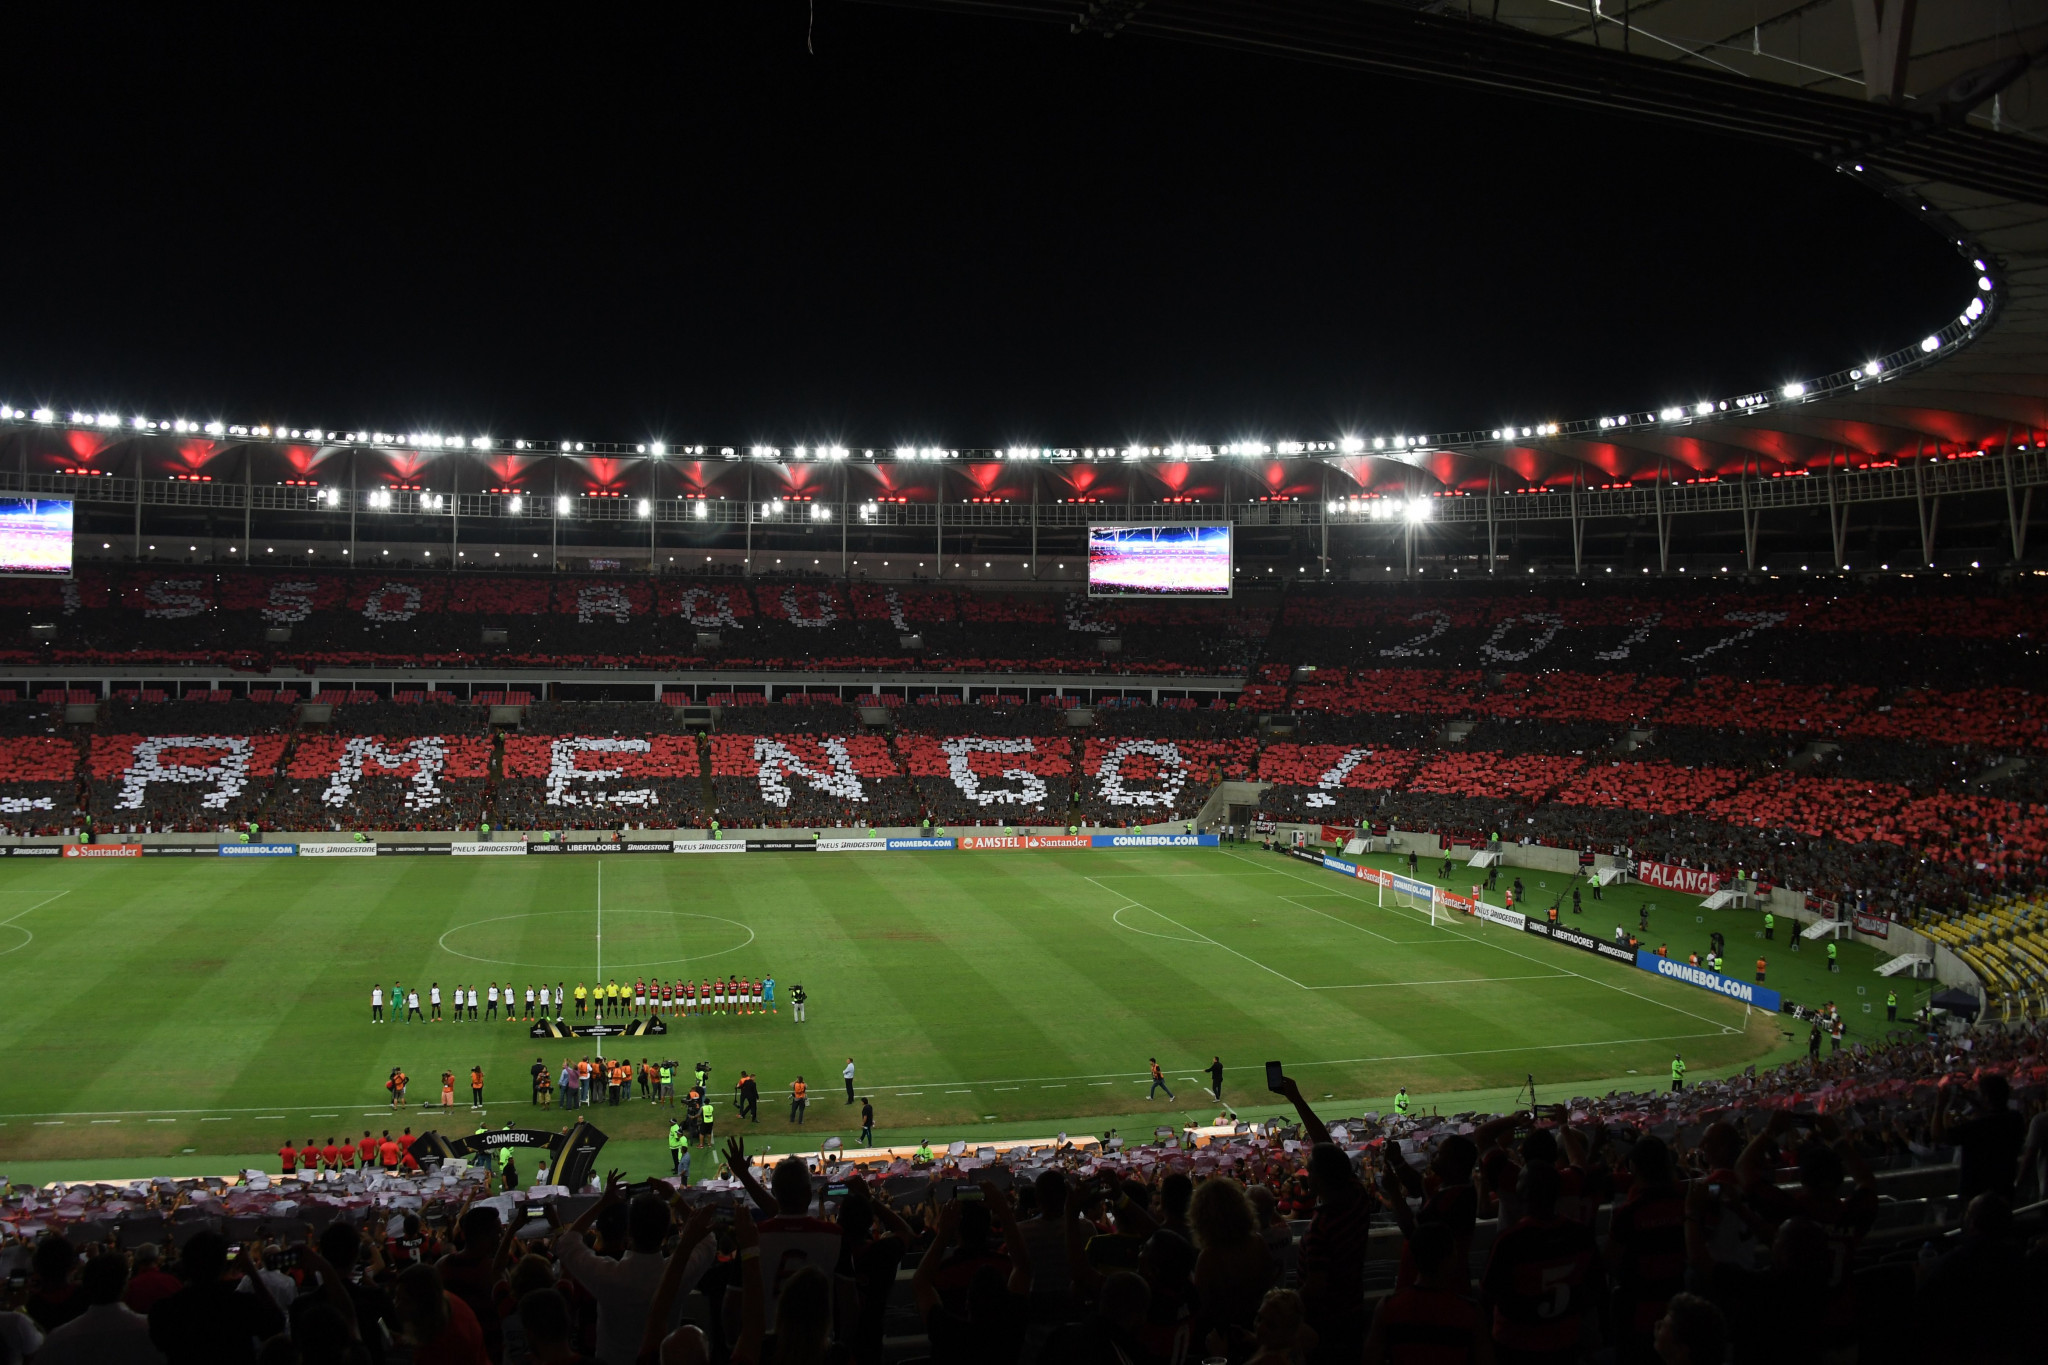 Flamengo have signed an agreement to play in the Maracanã ©Getty Images